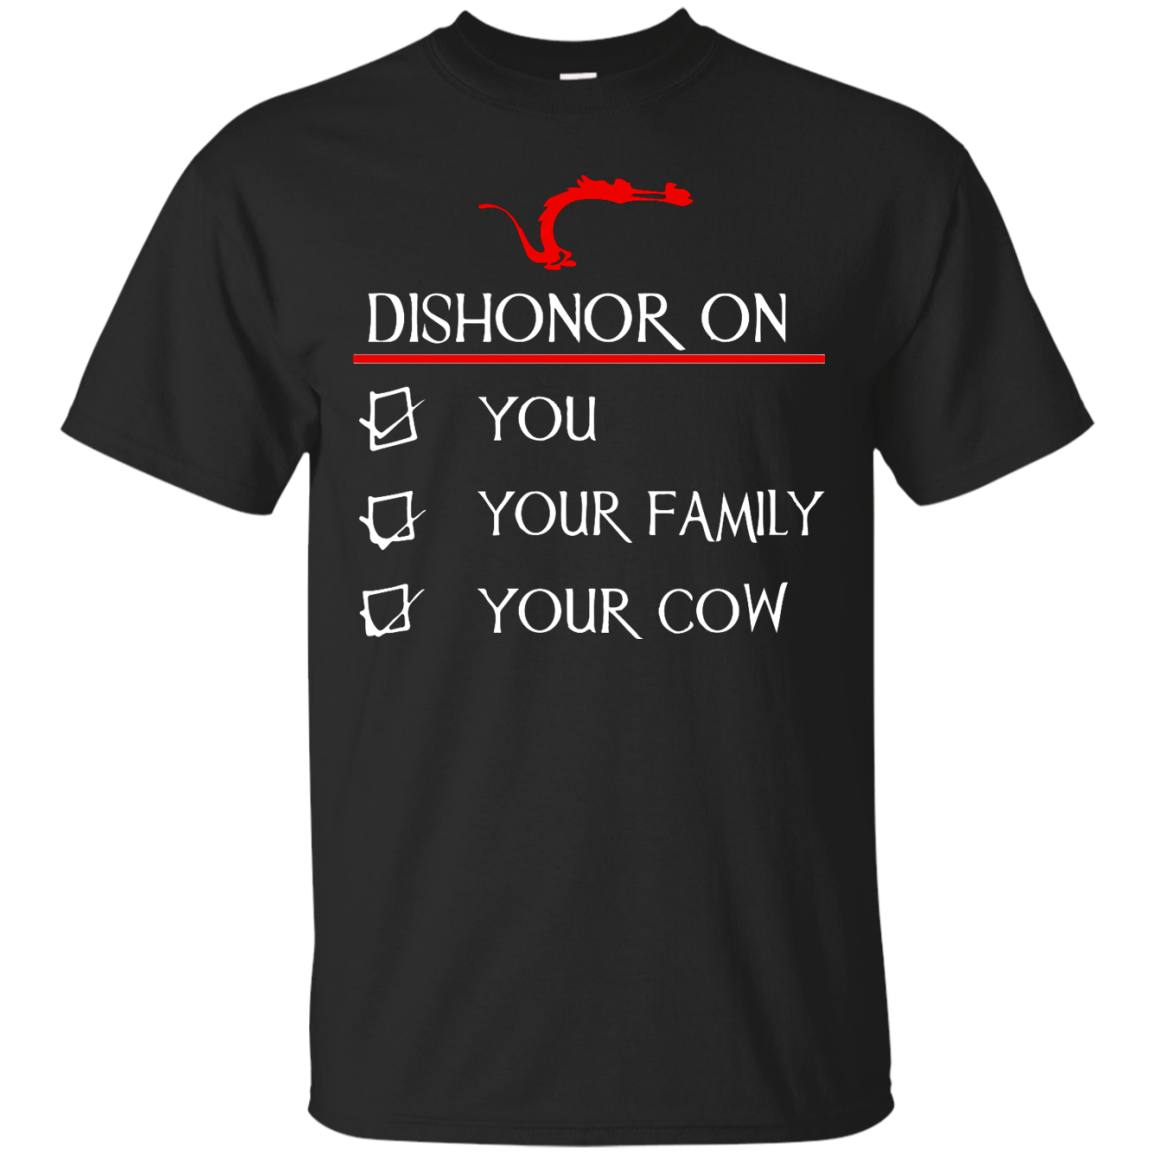 Dishonor on you your family your cow shirt, hoodie, tank